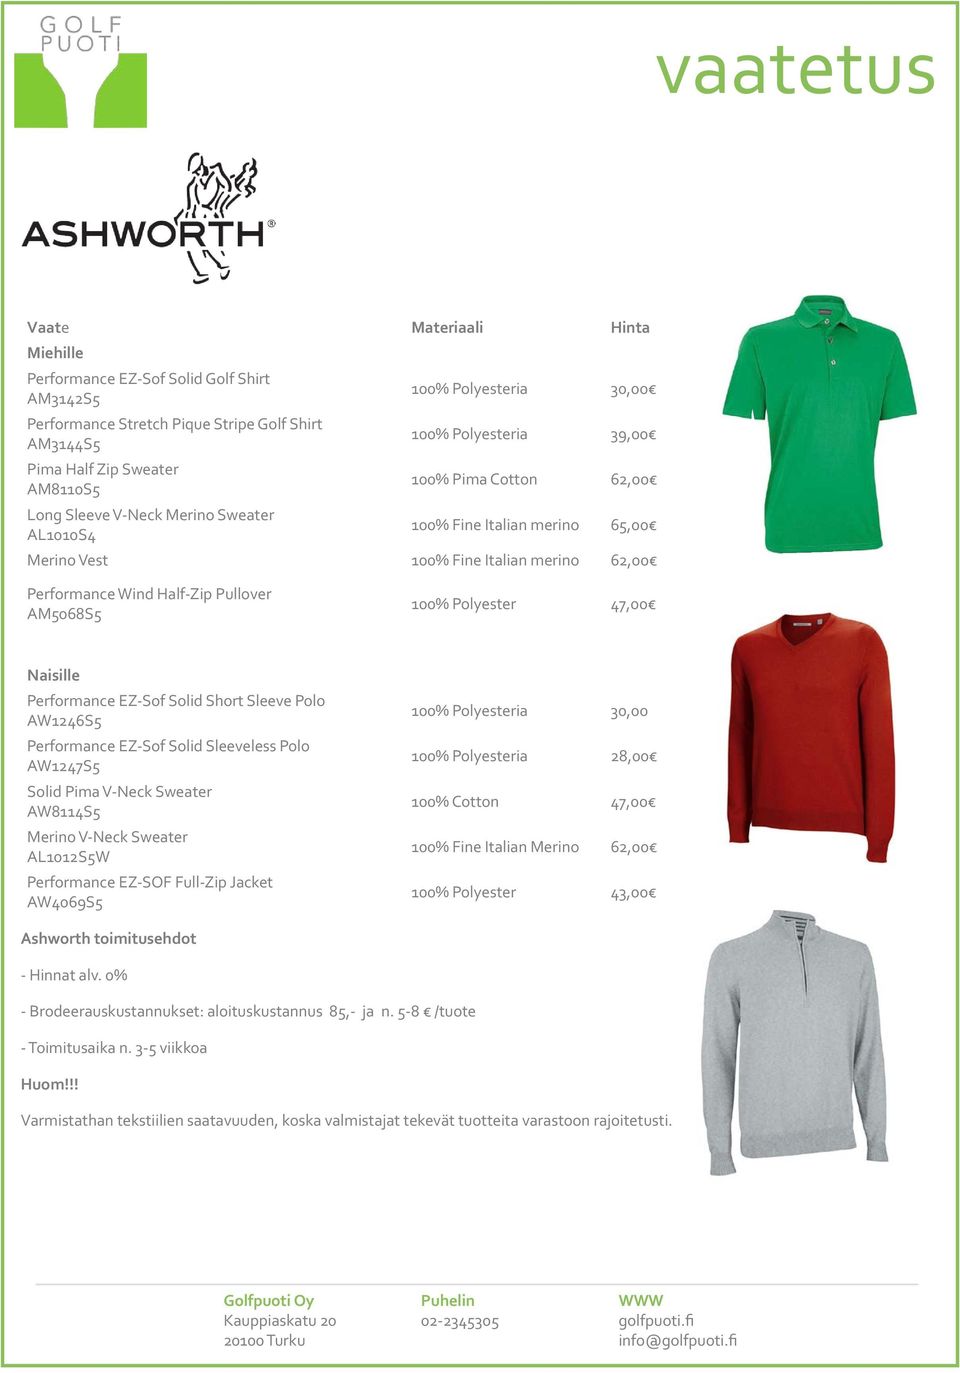 AM5068S5 100% Polyester 47,00 Naisille Performance EZ-Sof Solid Short Sleeve Polo AW1246S5 Performance EZ-Sof Solid Sleeveless Polo AW1247S5 Solid Pima V-Neck Sweater AW8114S5 Merino V-Neck Sweater